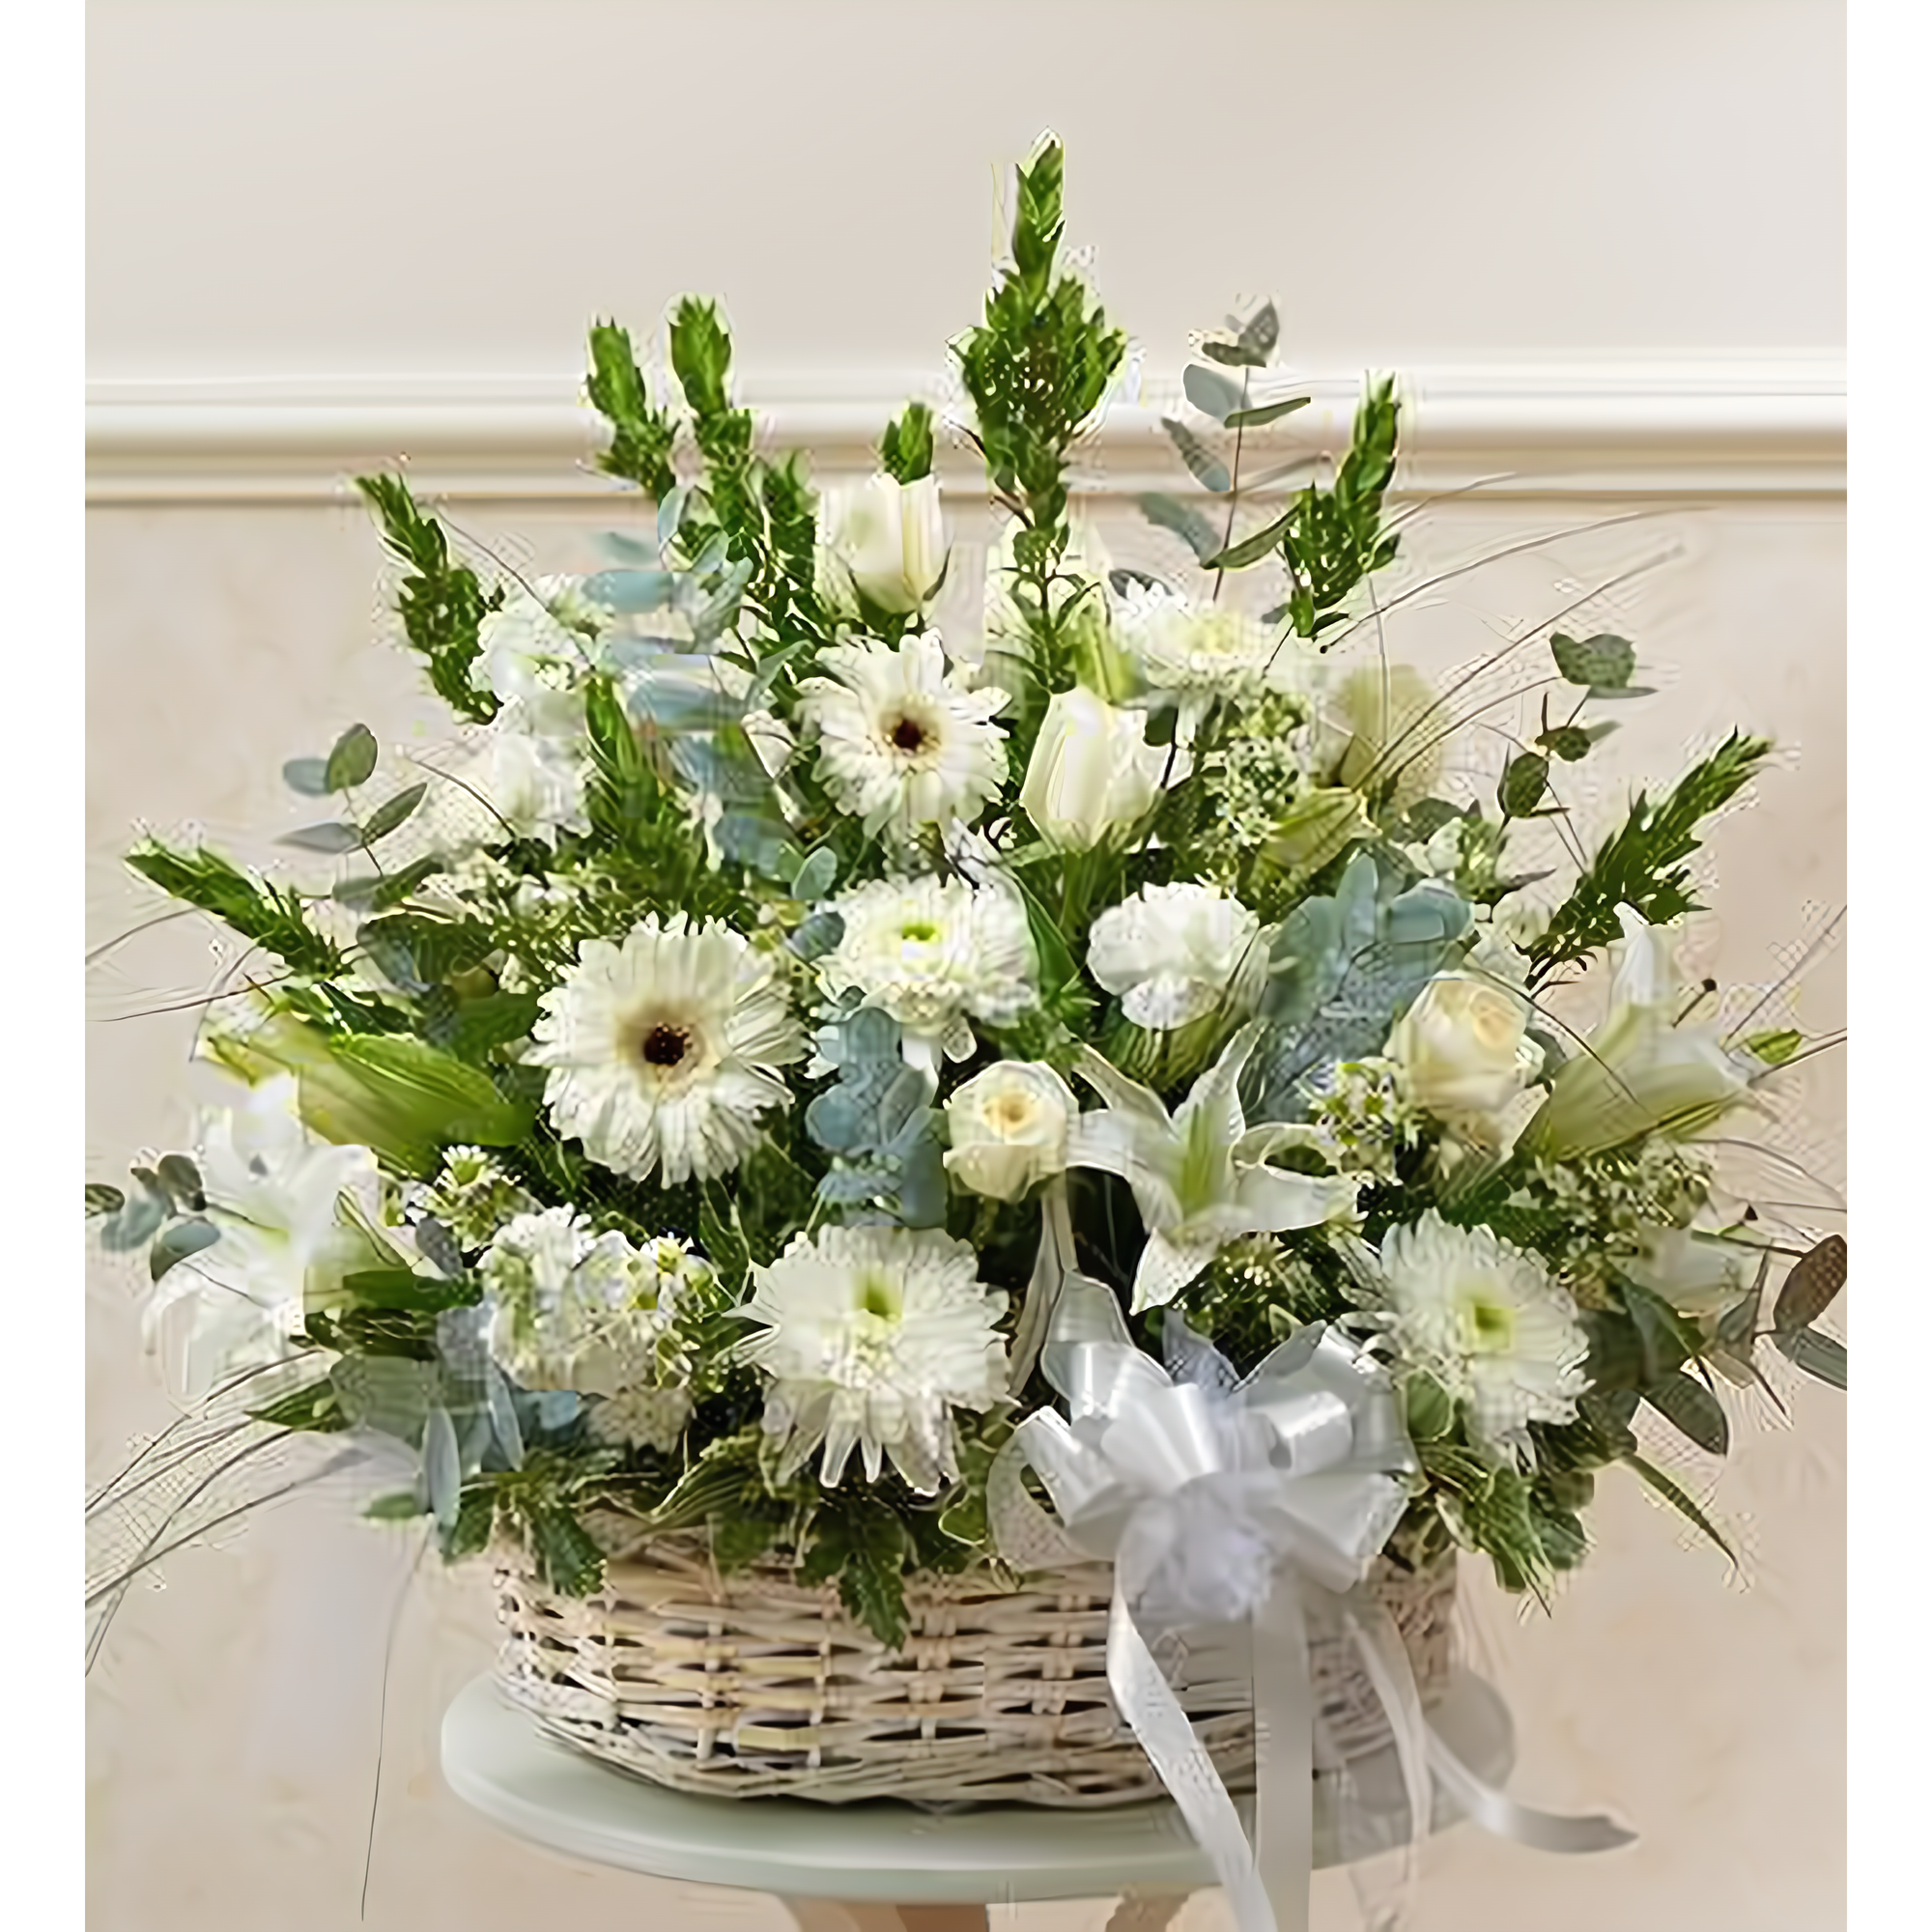 White Sympathy Arrangement in Basket - Funeral > For the Service